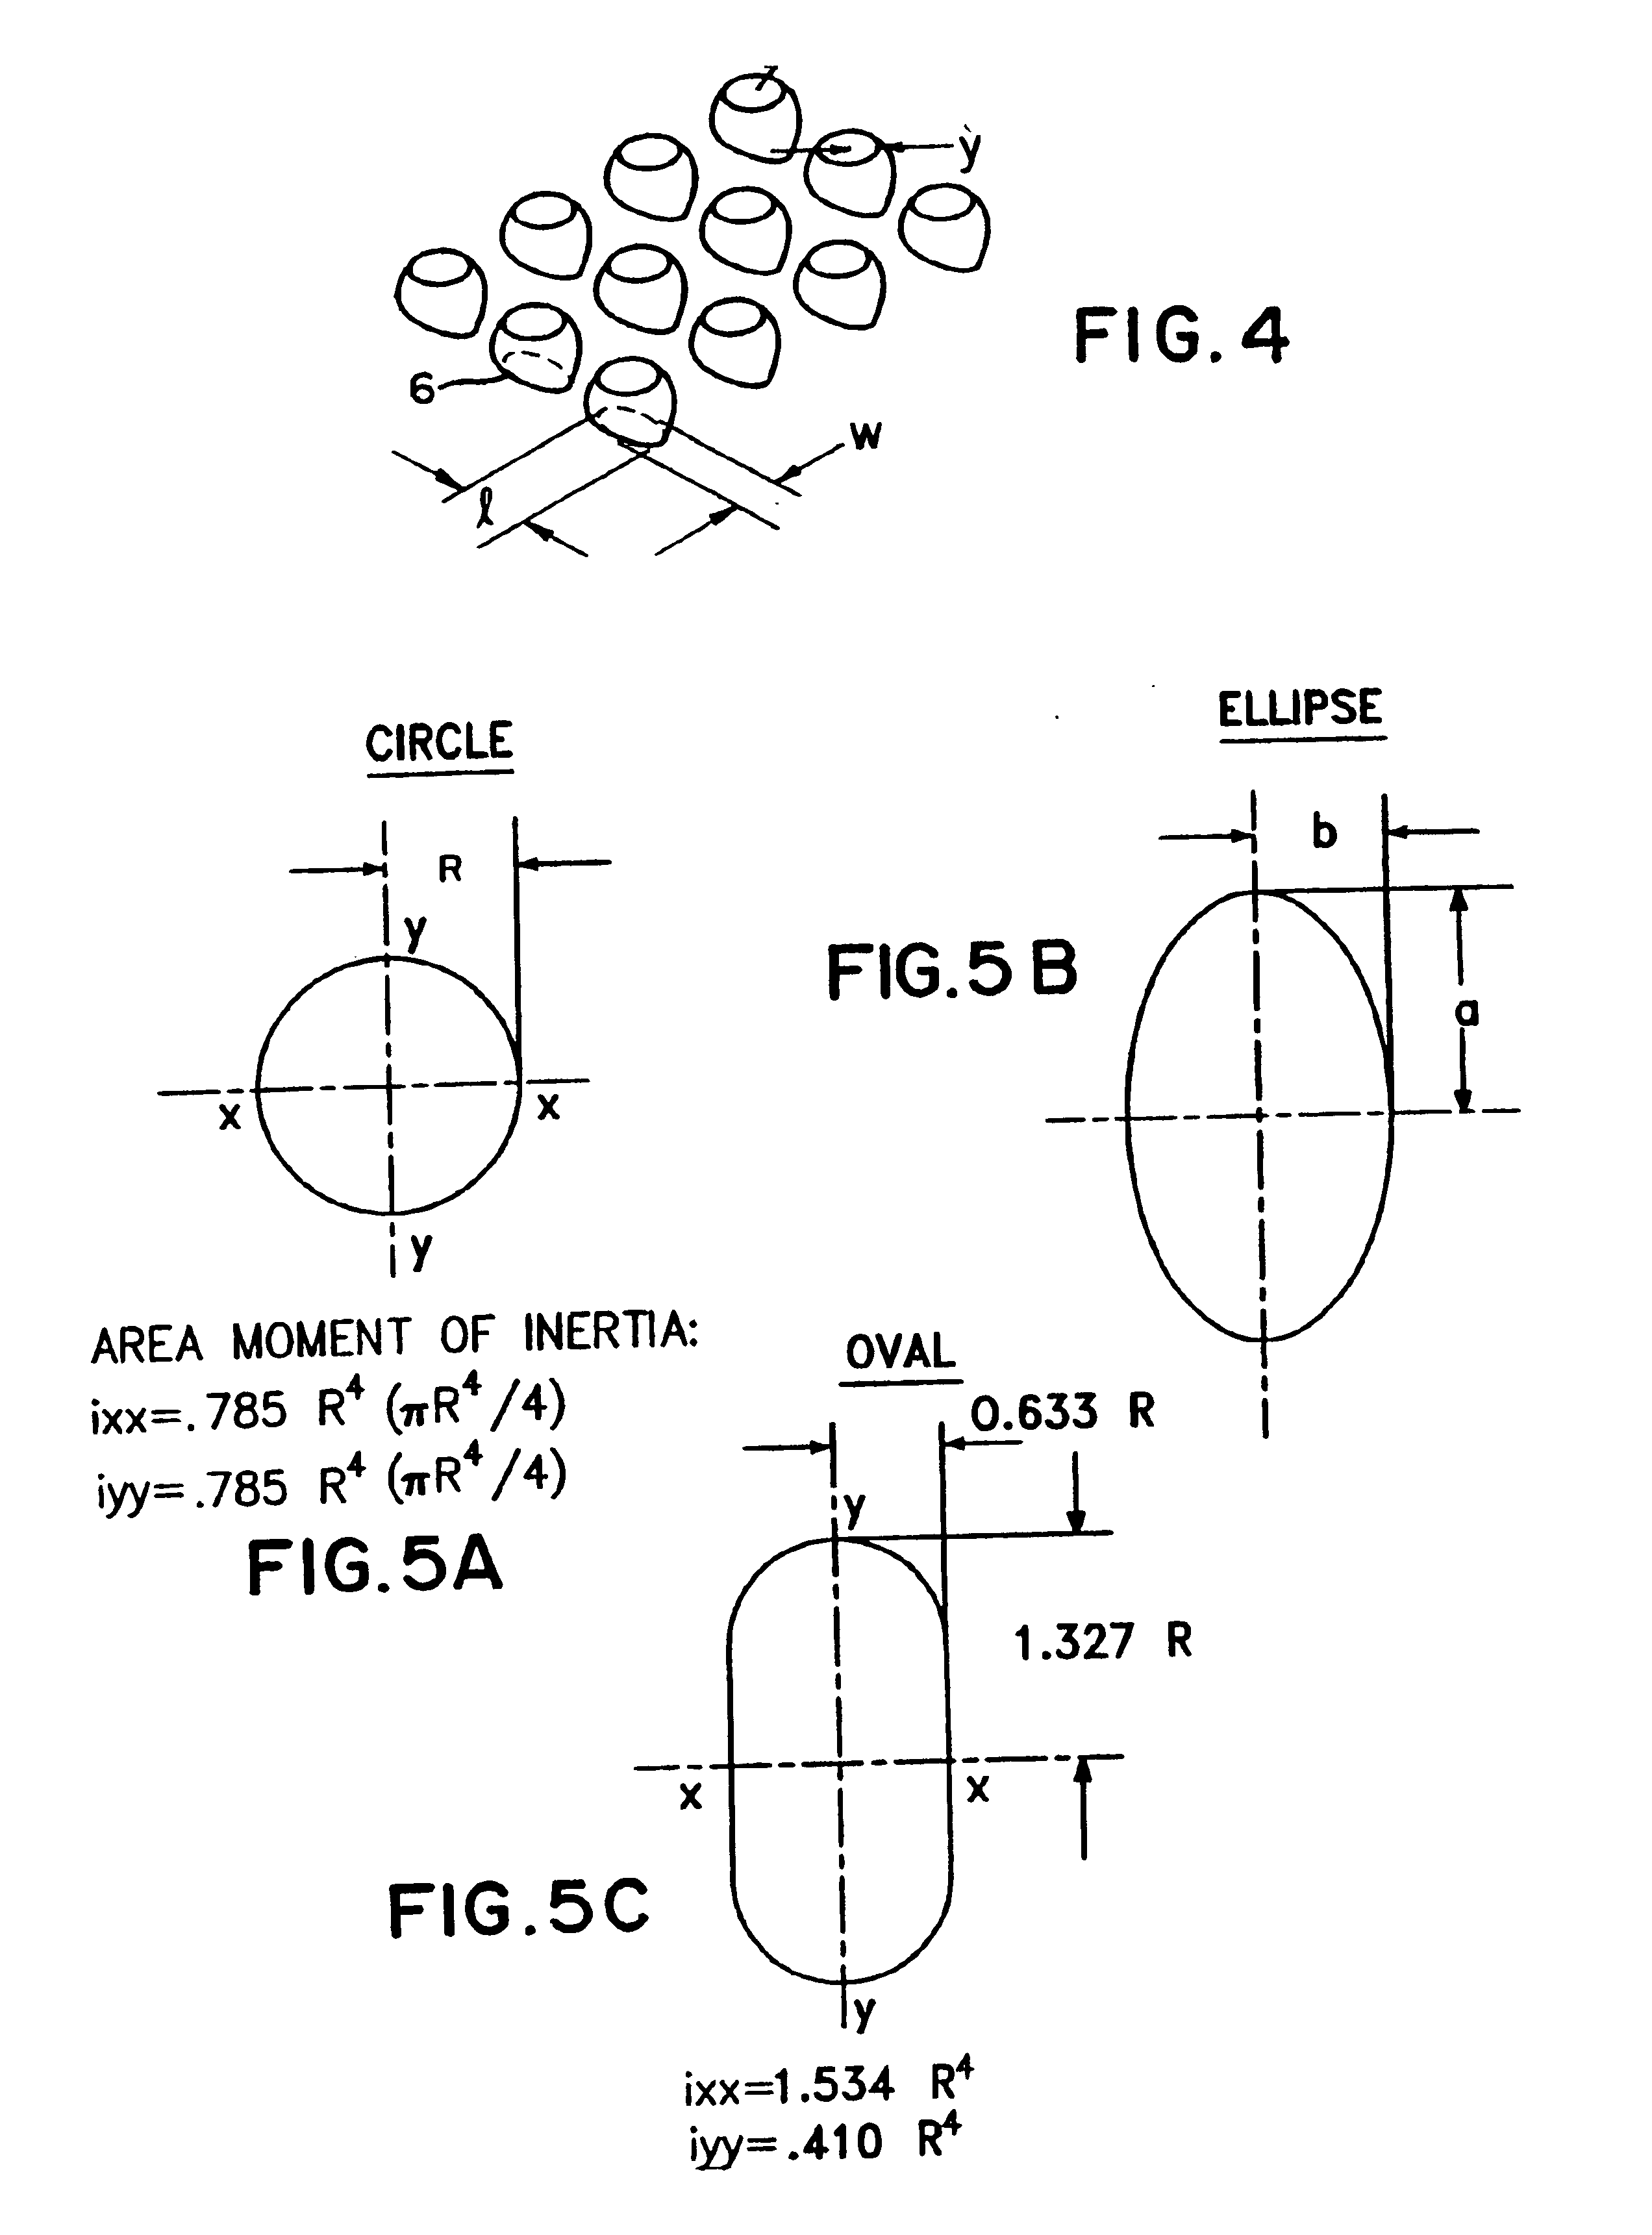 Stress accommodation in electronic device interconnect technology for millimeter contact locations